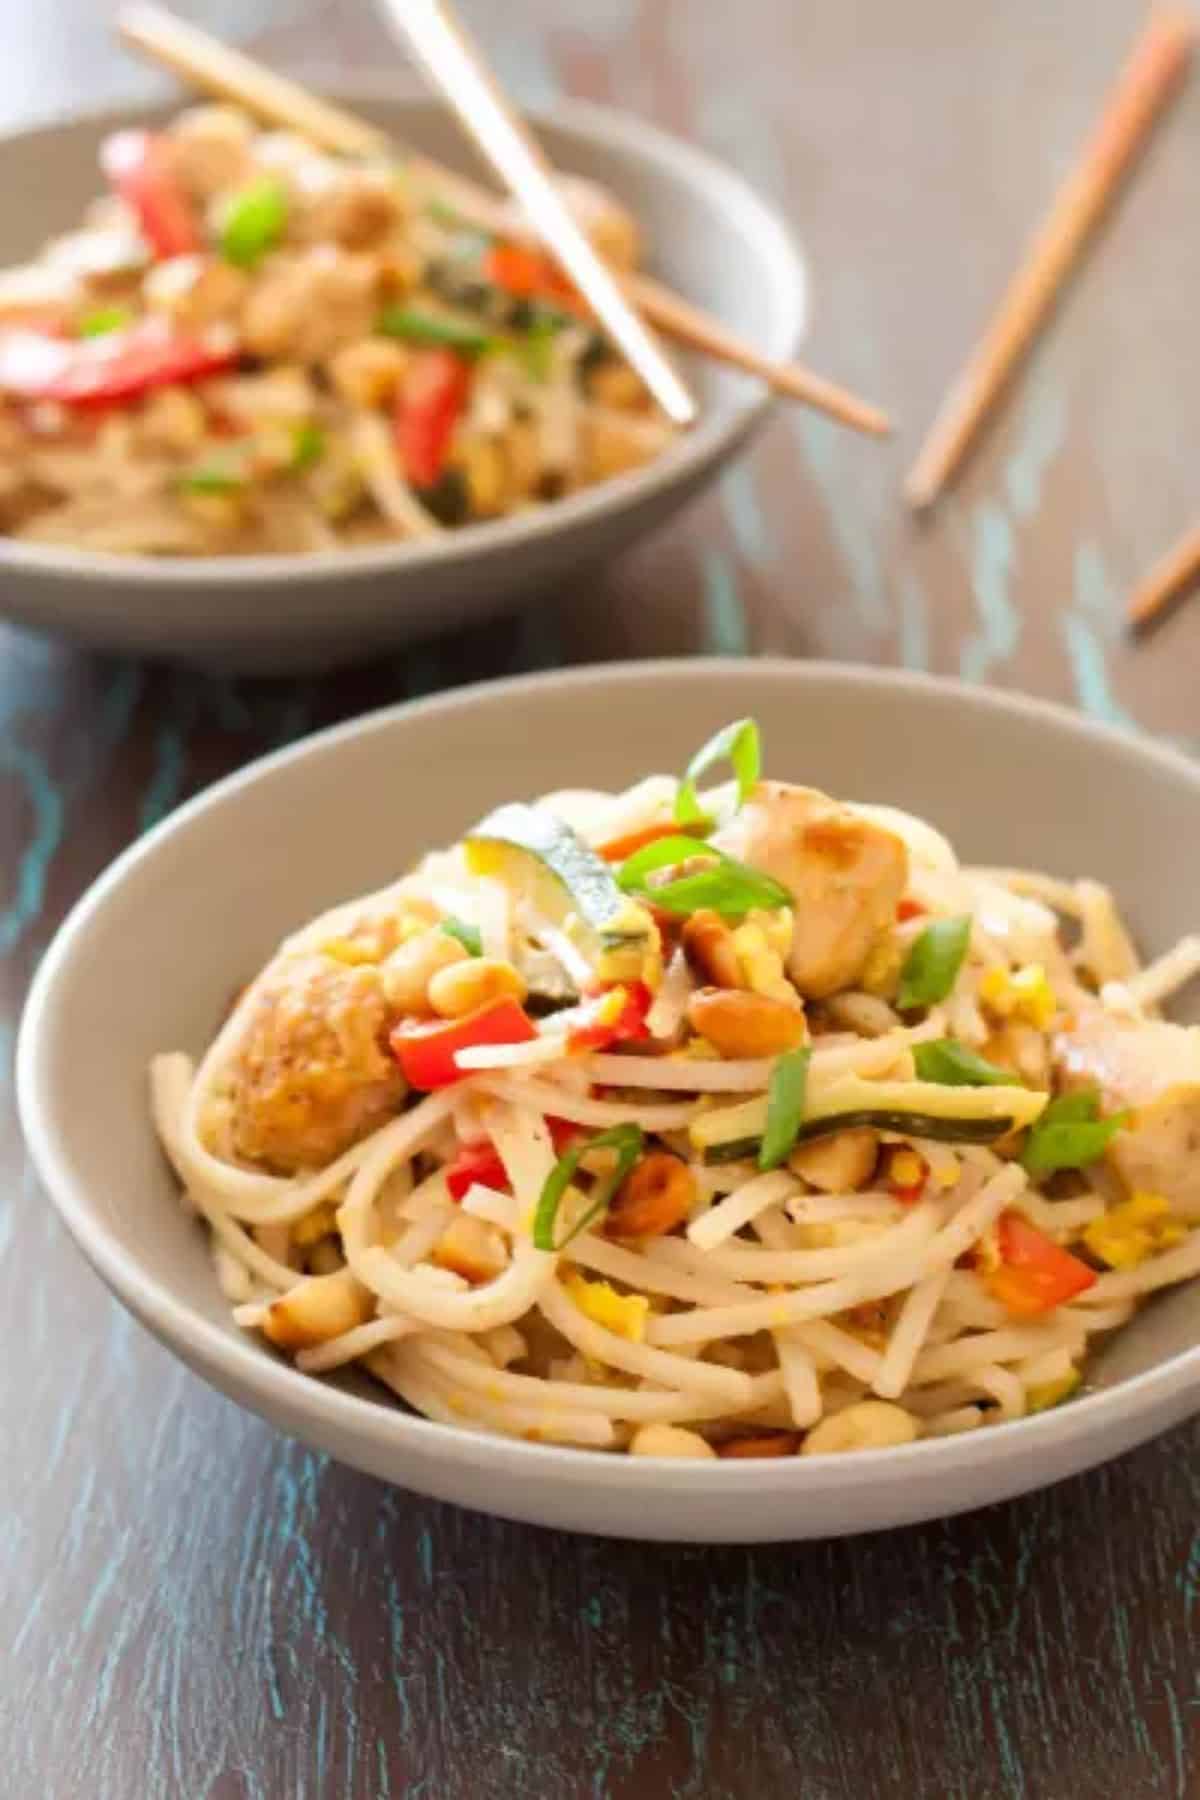 Healthy Gluten-Free Pad Thai in two gray bowls.